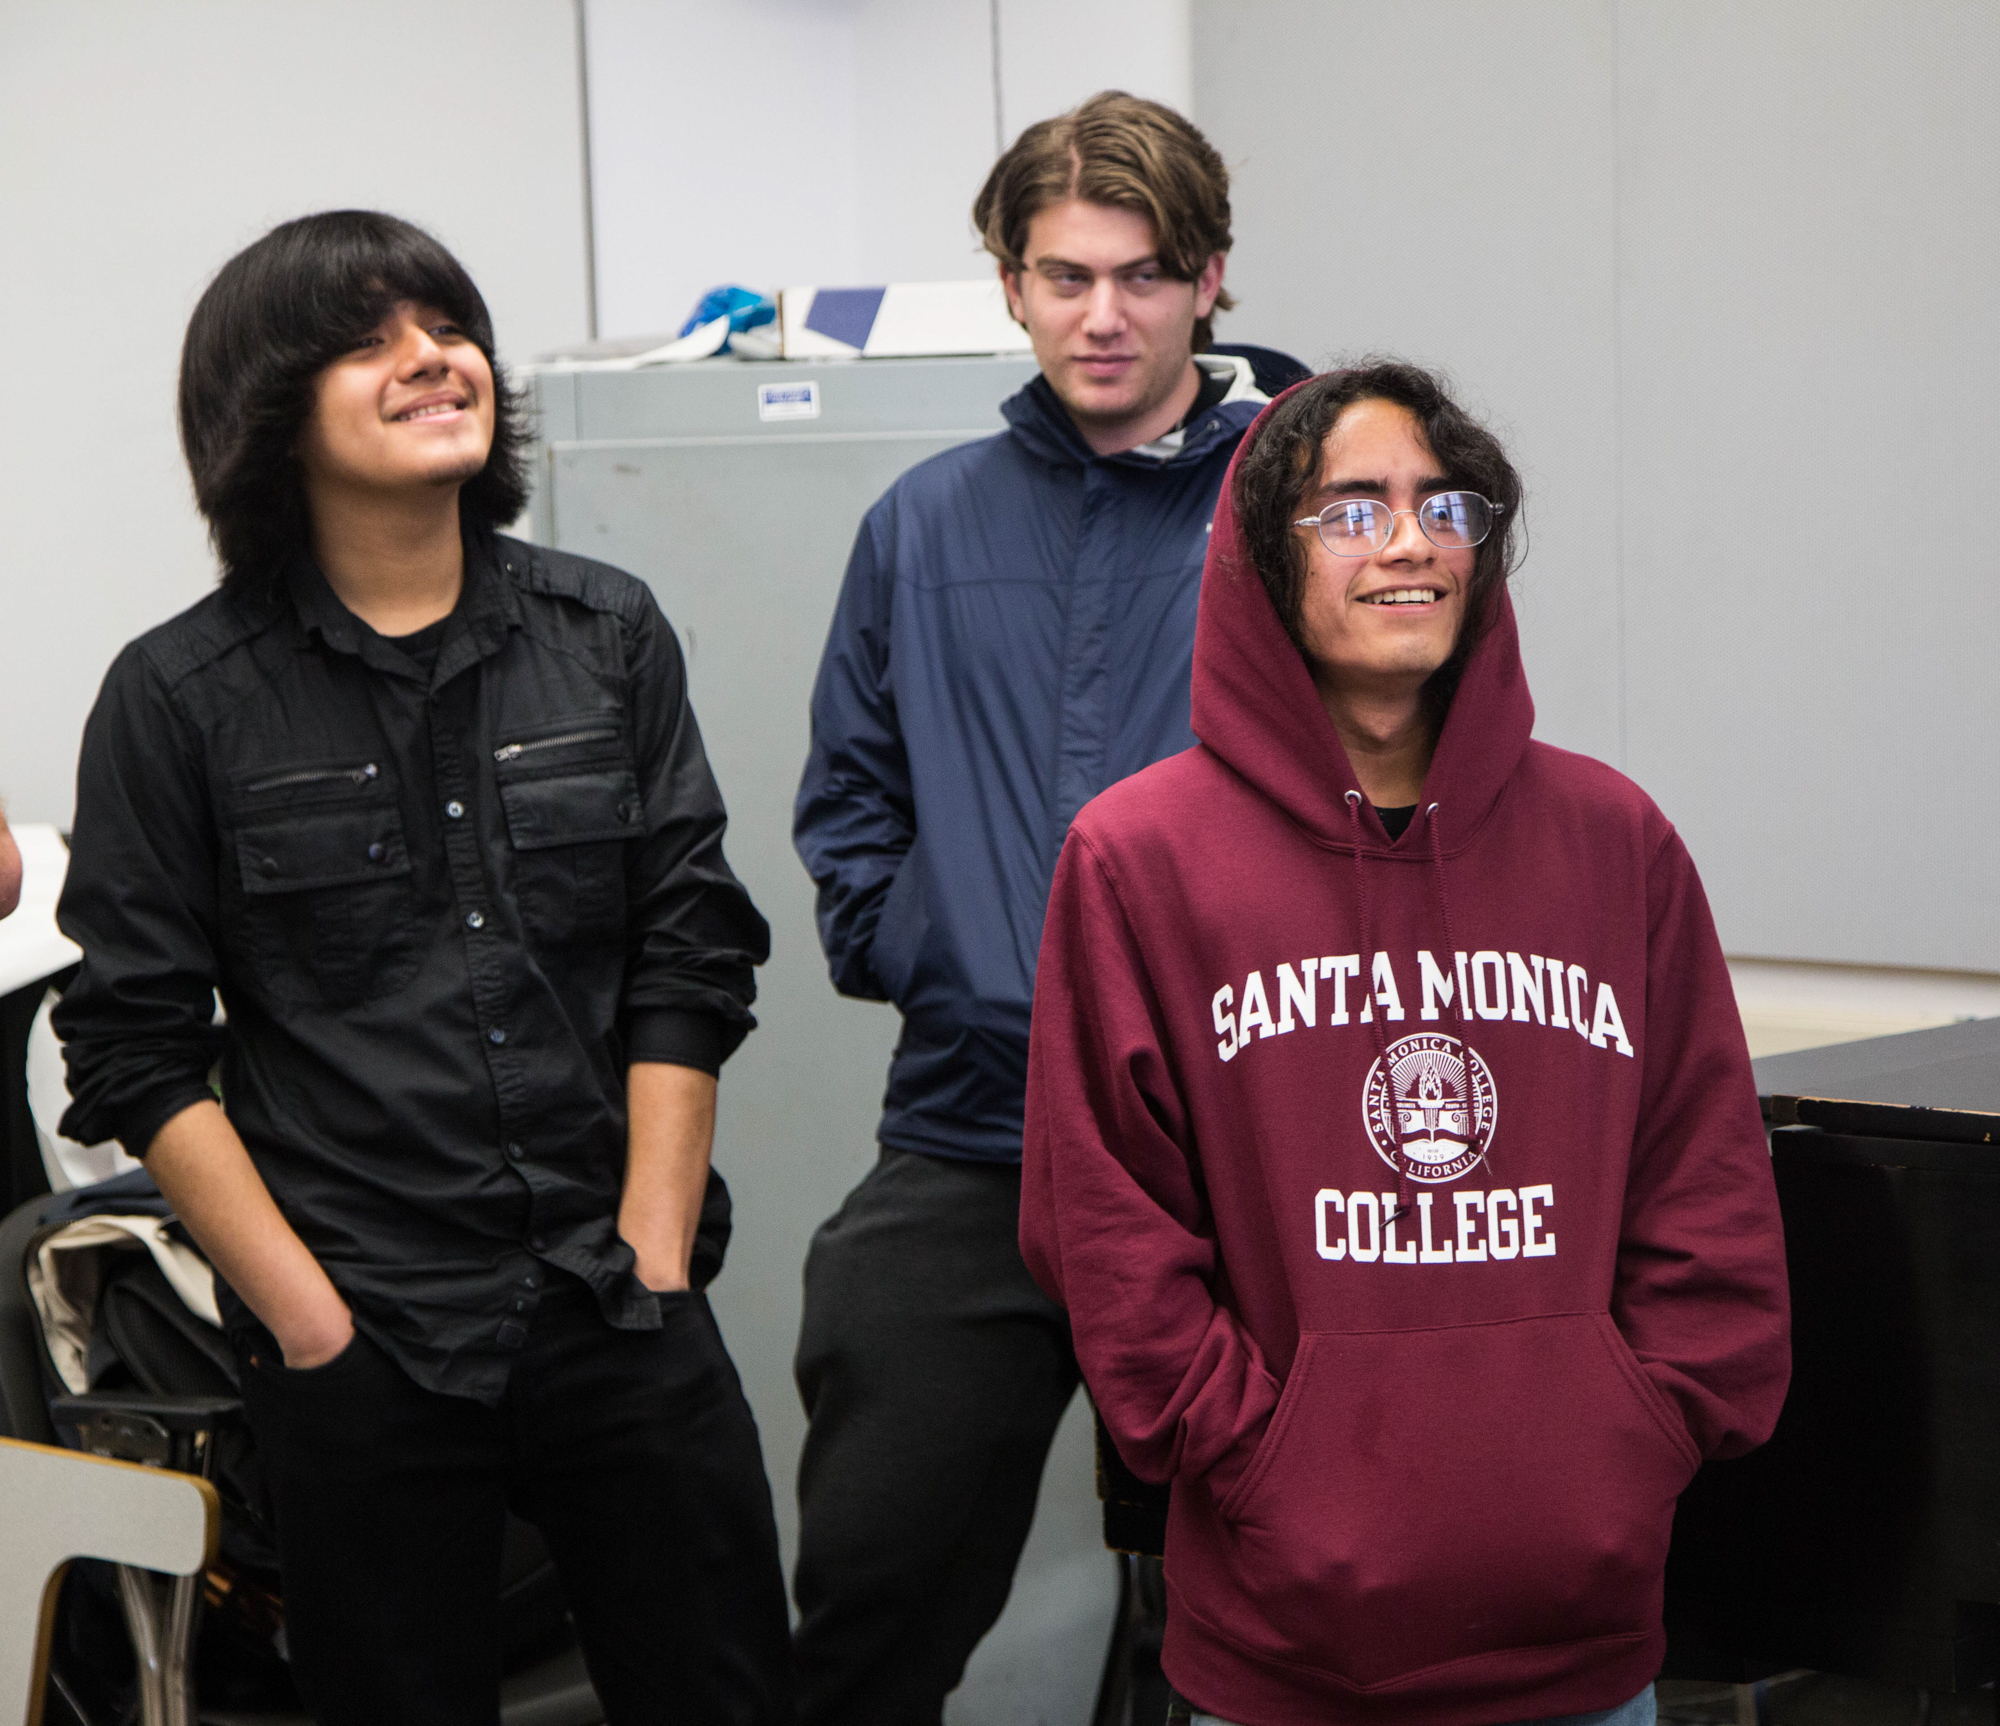  Club members (left to right) Carlos Edenilson Mira, Ethan Tadmor and Angel Remegio-Romero in Music Appreceation Club meeting , Thursday, March 22, 2018, at Santa Monica College's Performance Arts Center in Santa Monica, California (Zeynep Abes/ Cors